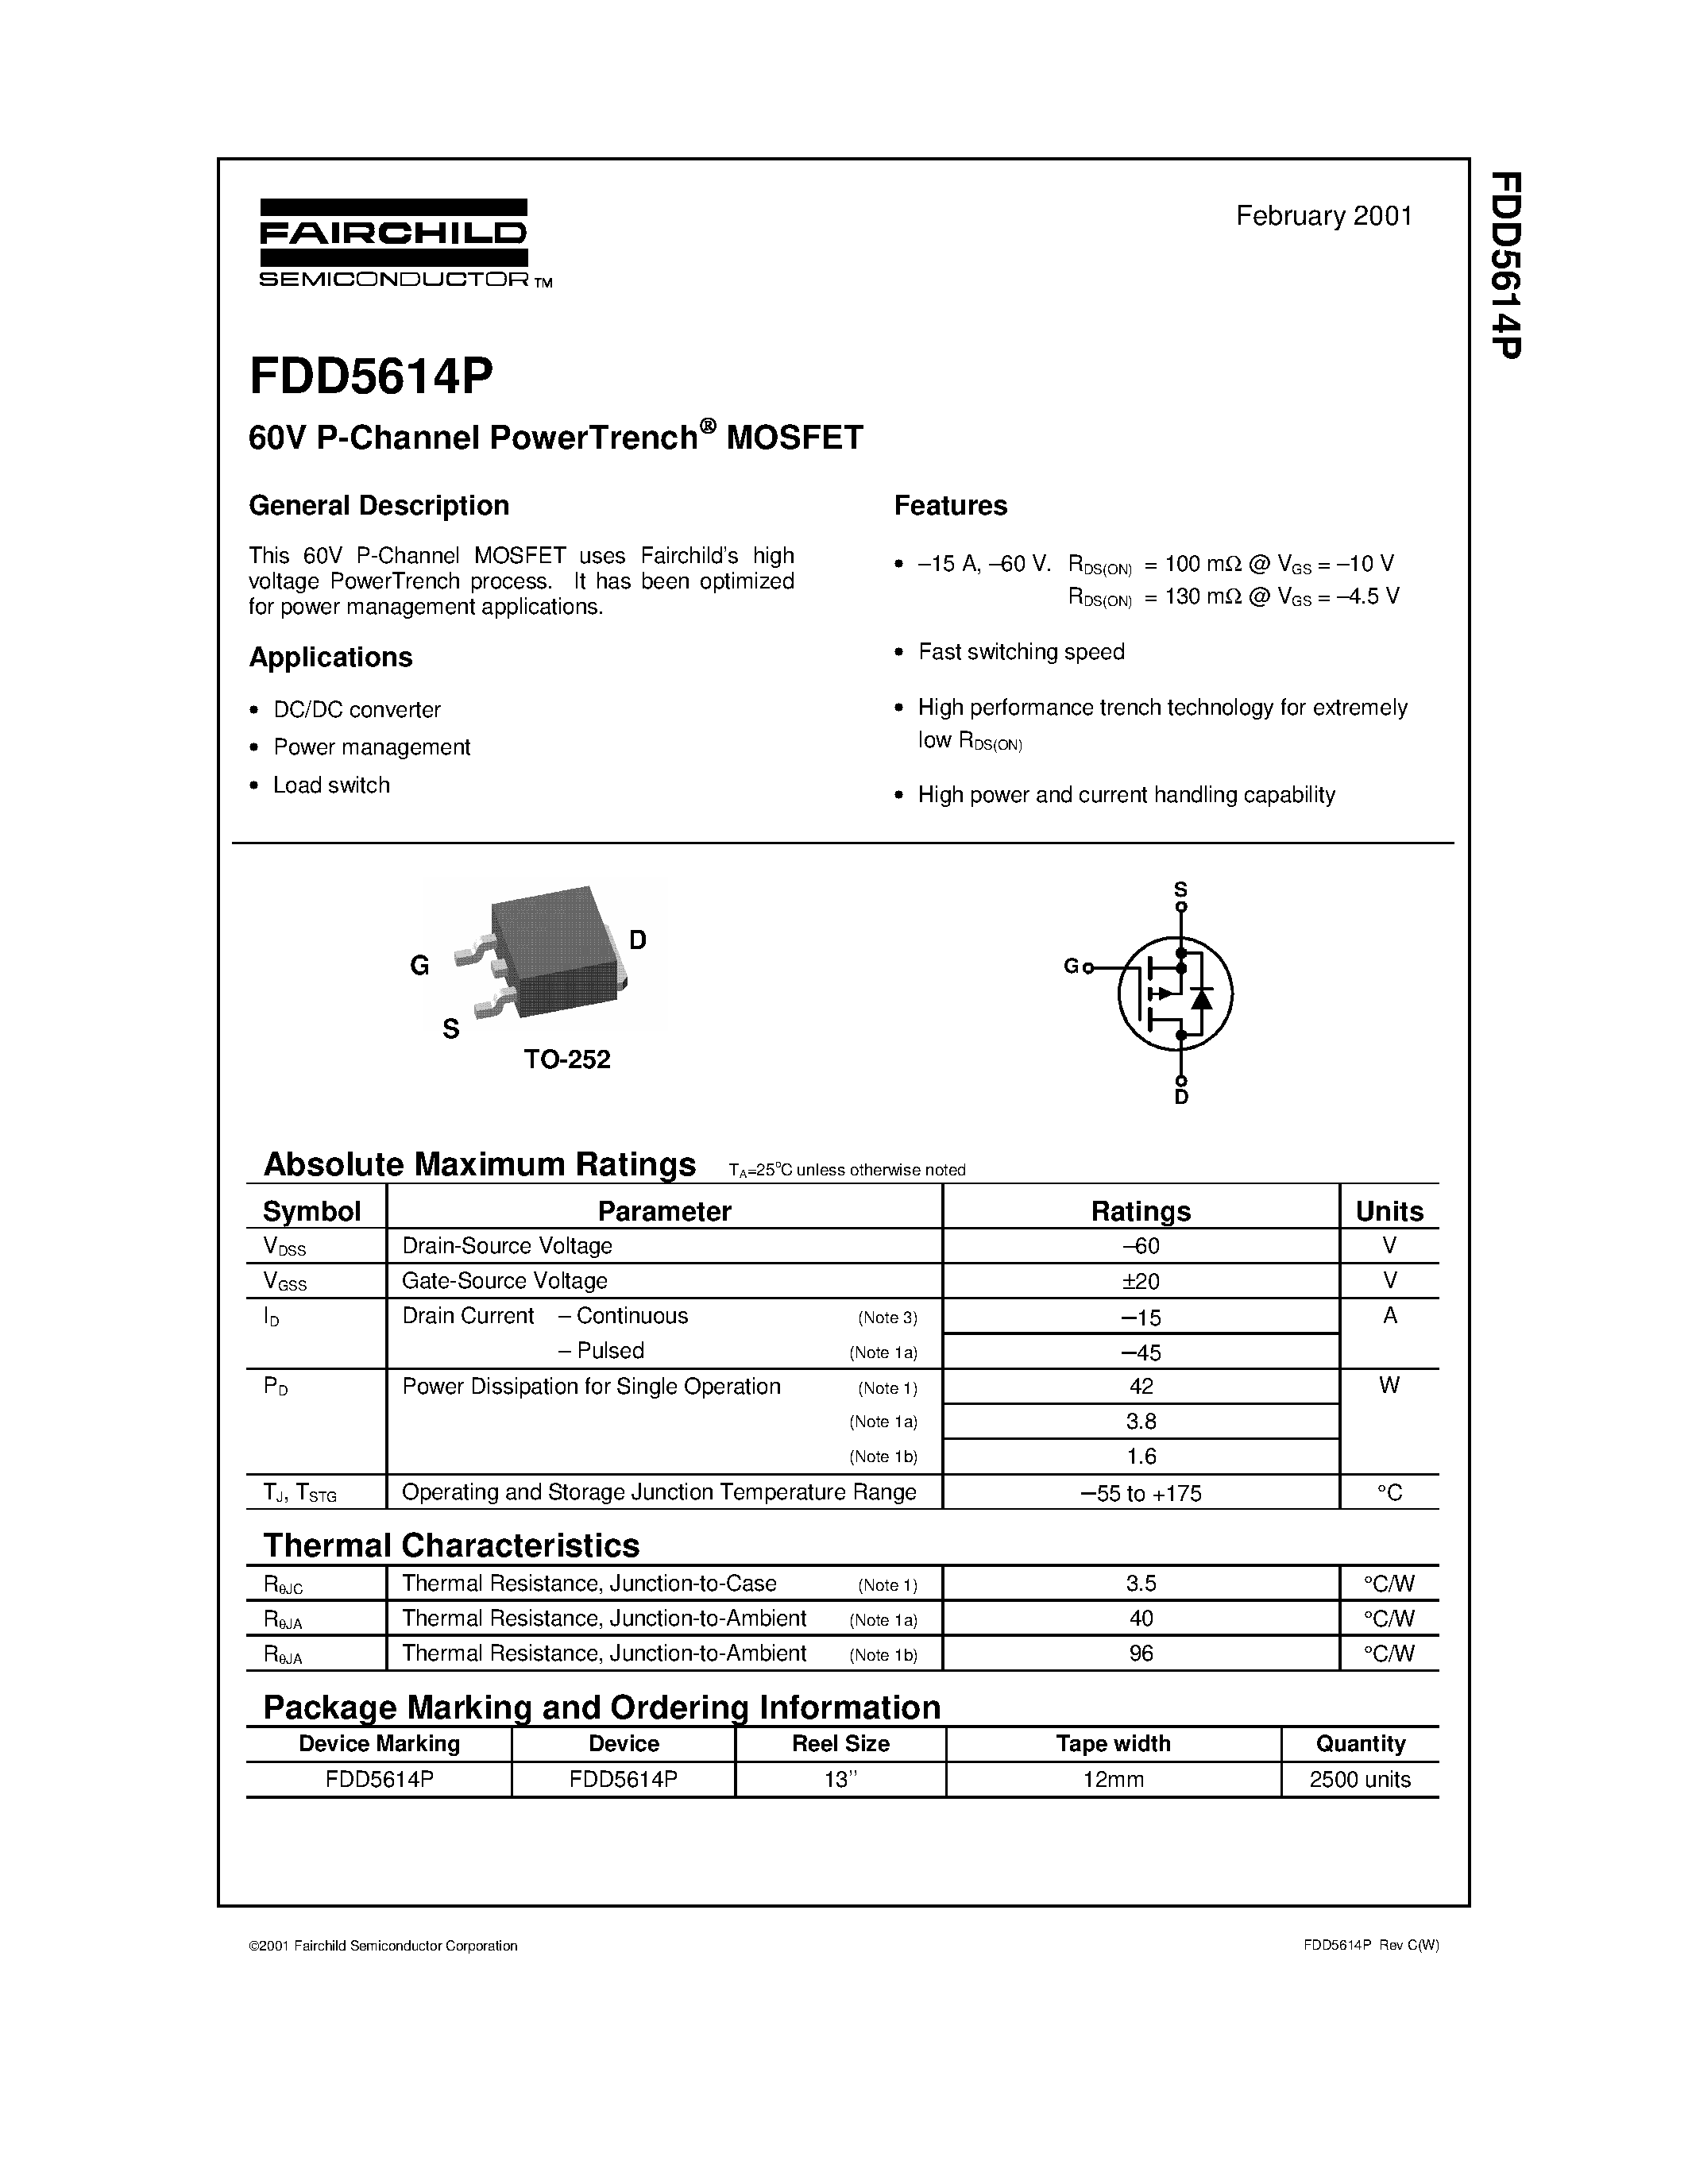 Даташит FDD5614P - 60V P-Channel PowerTrench MOSFET страница 1